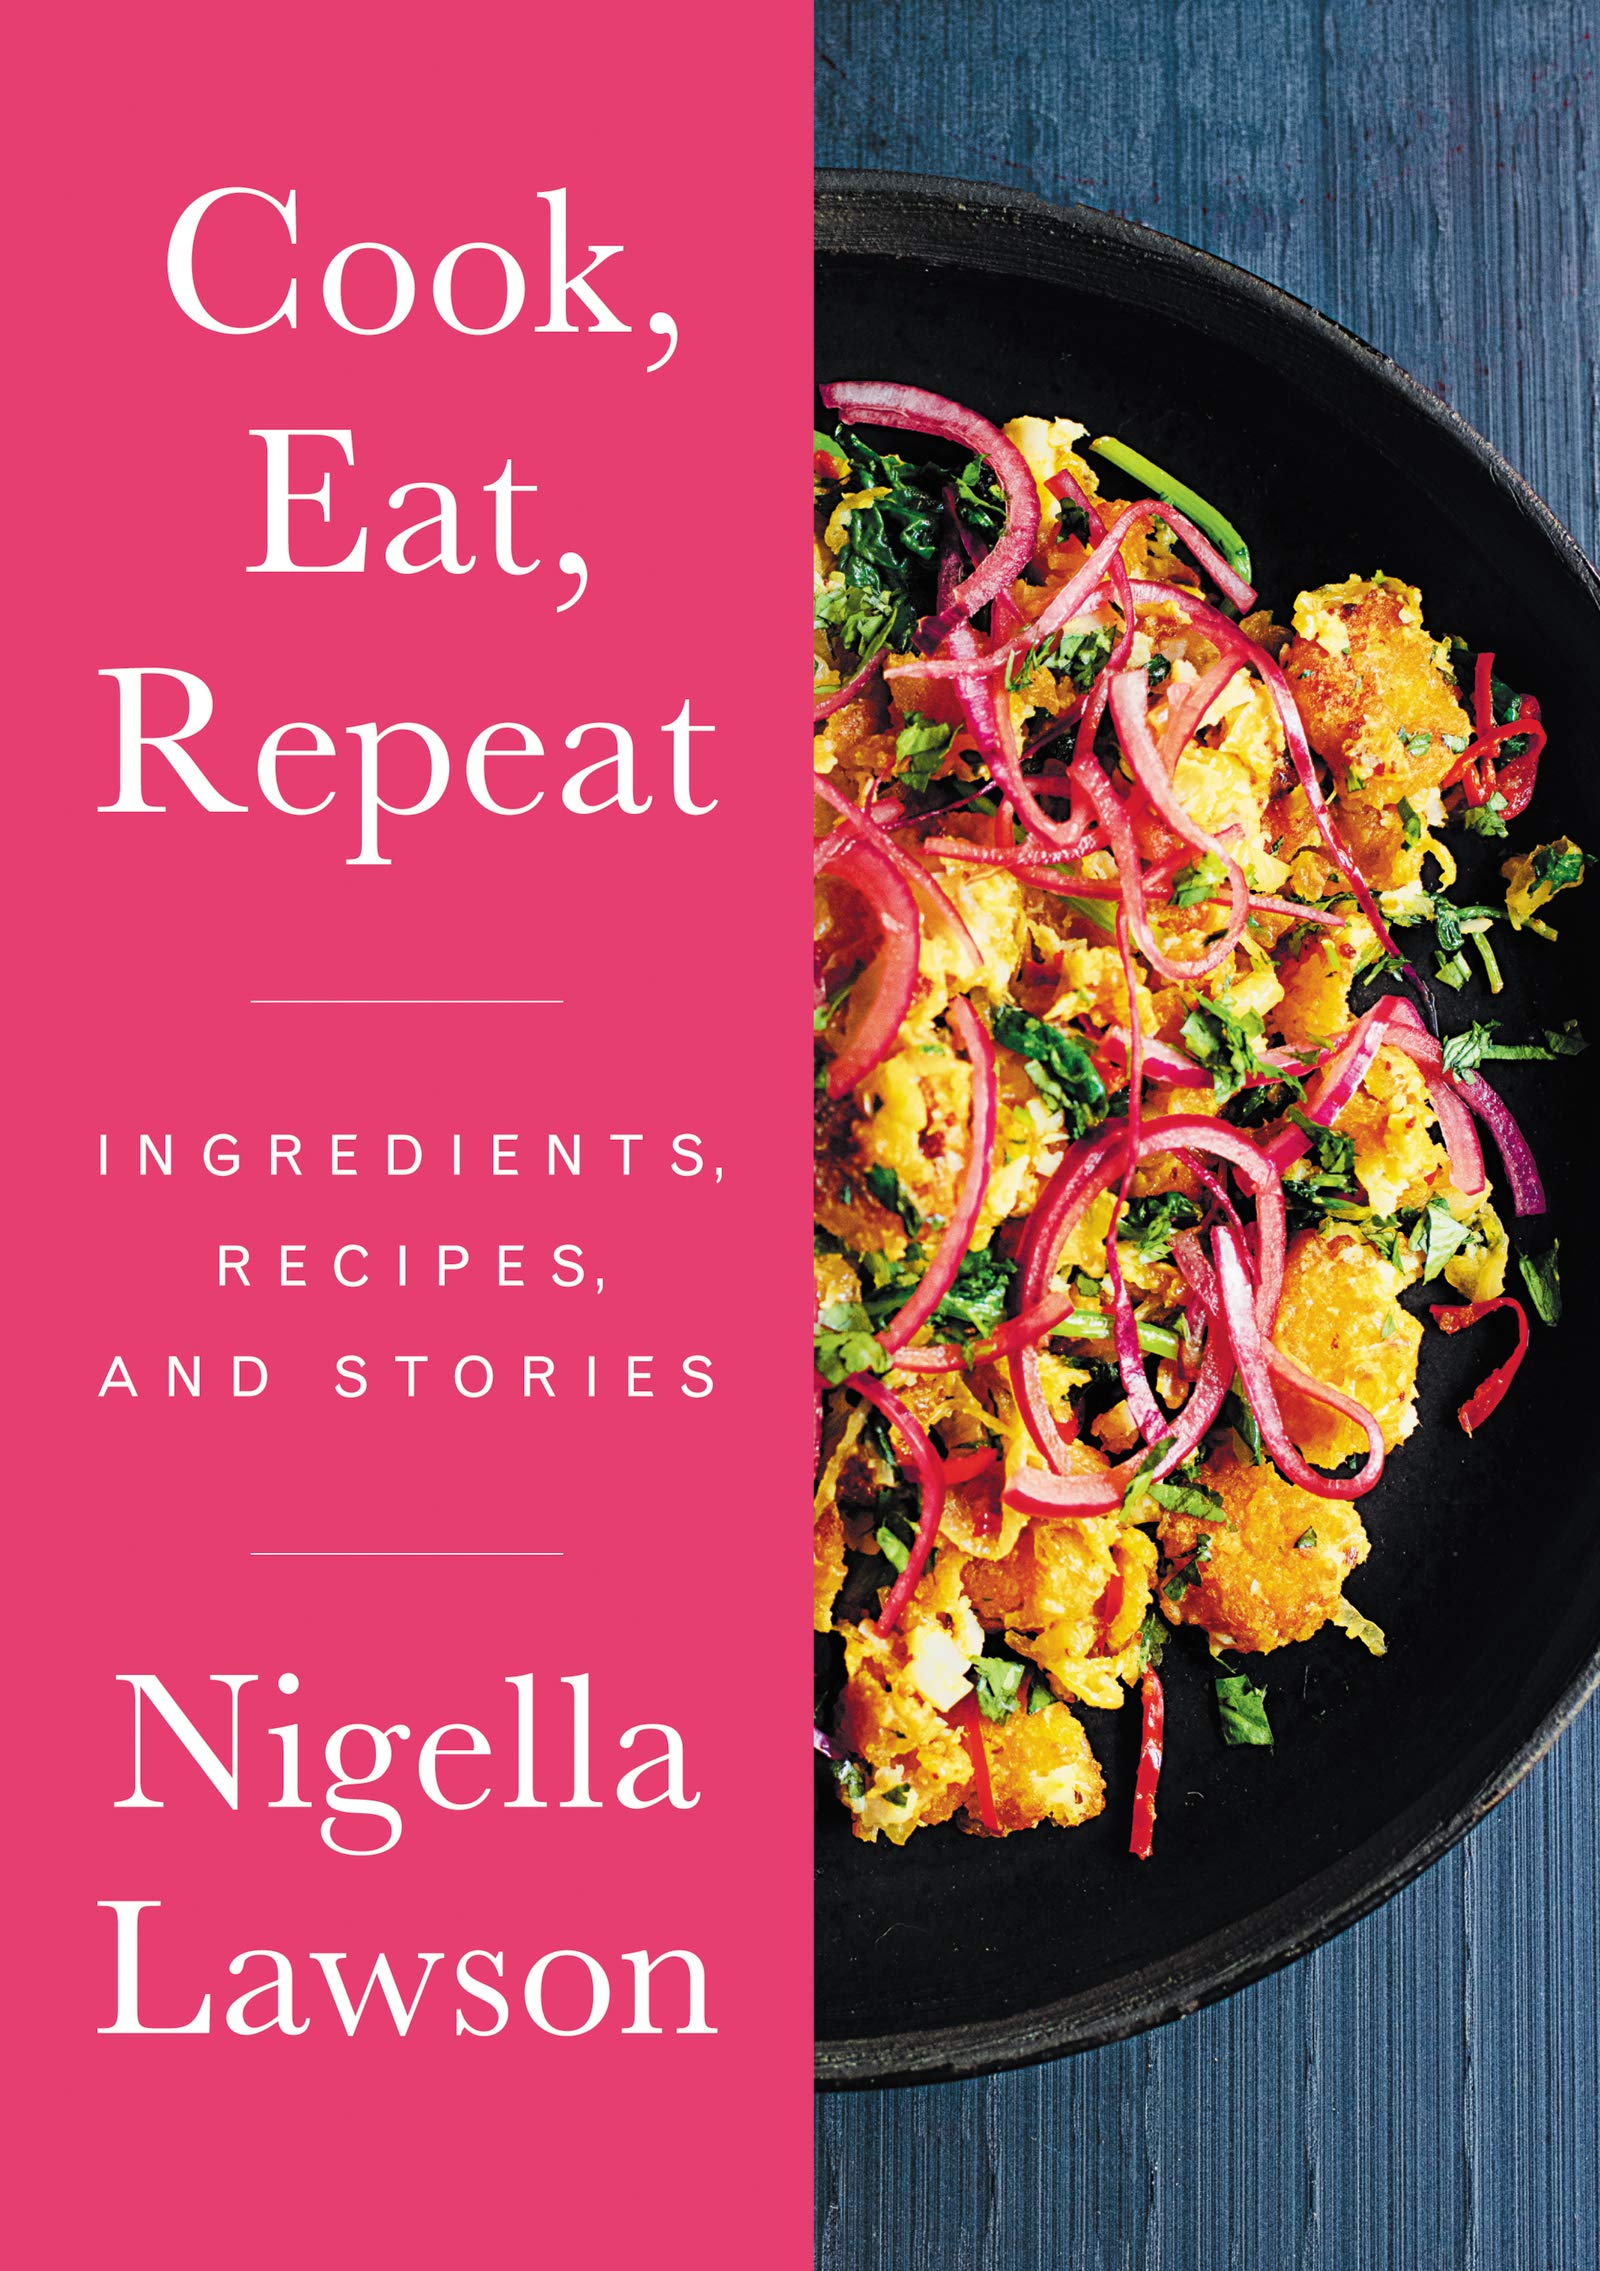 Cook, Eat, Repeat: Ingredients, Recipes, and Stories (Nigella Lawson)